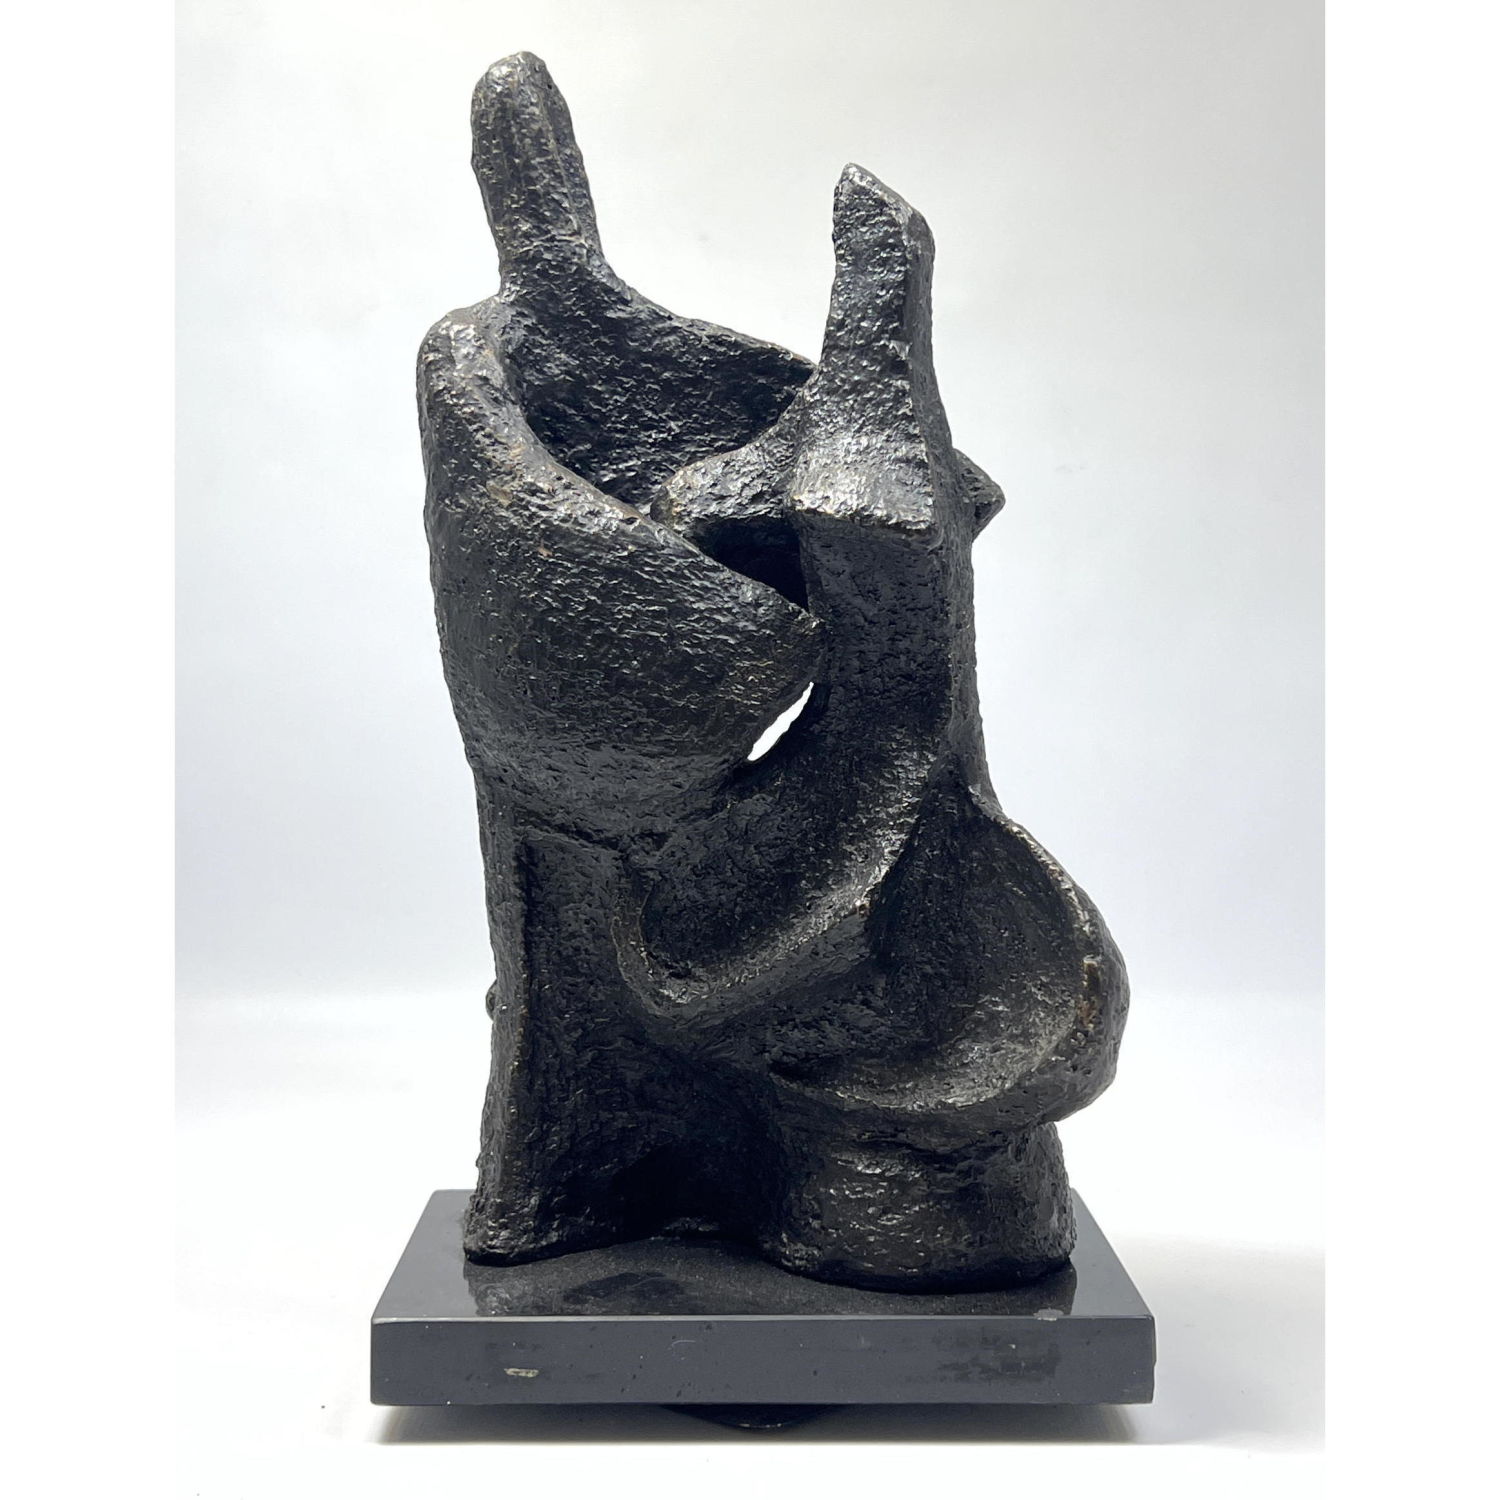 Henry Moore Style Sculpture in 2fce70